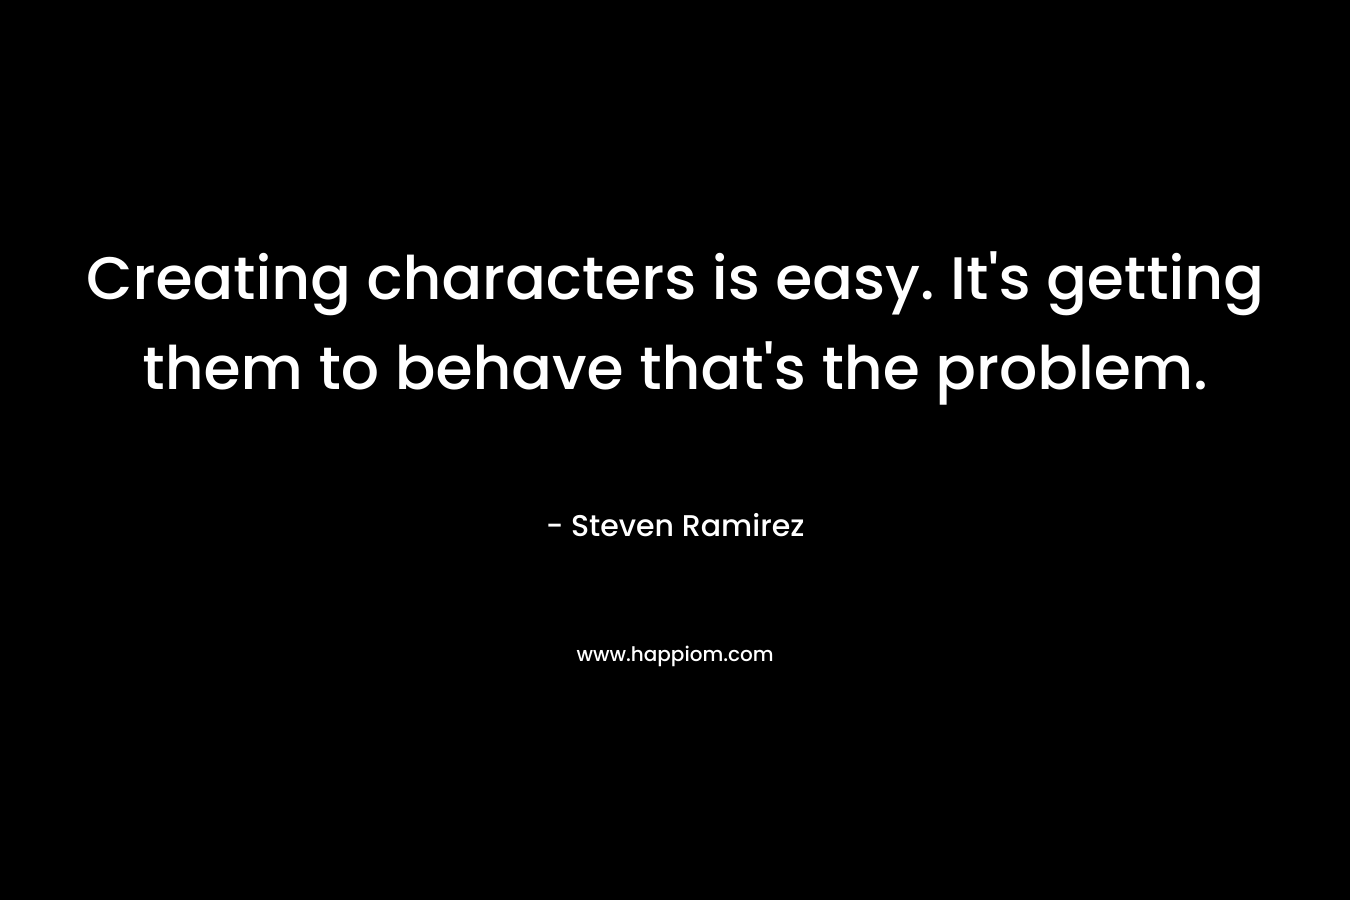 Creating characters is easy. It’s getting them to behave that’s the problem. – Steven Ramirez